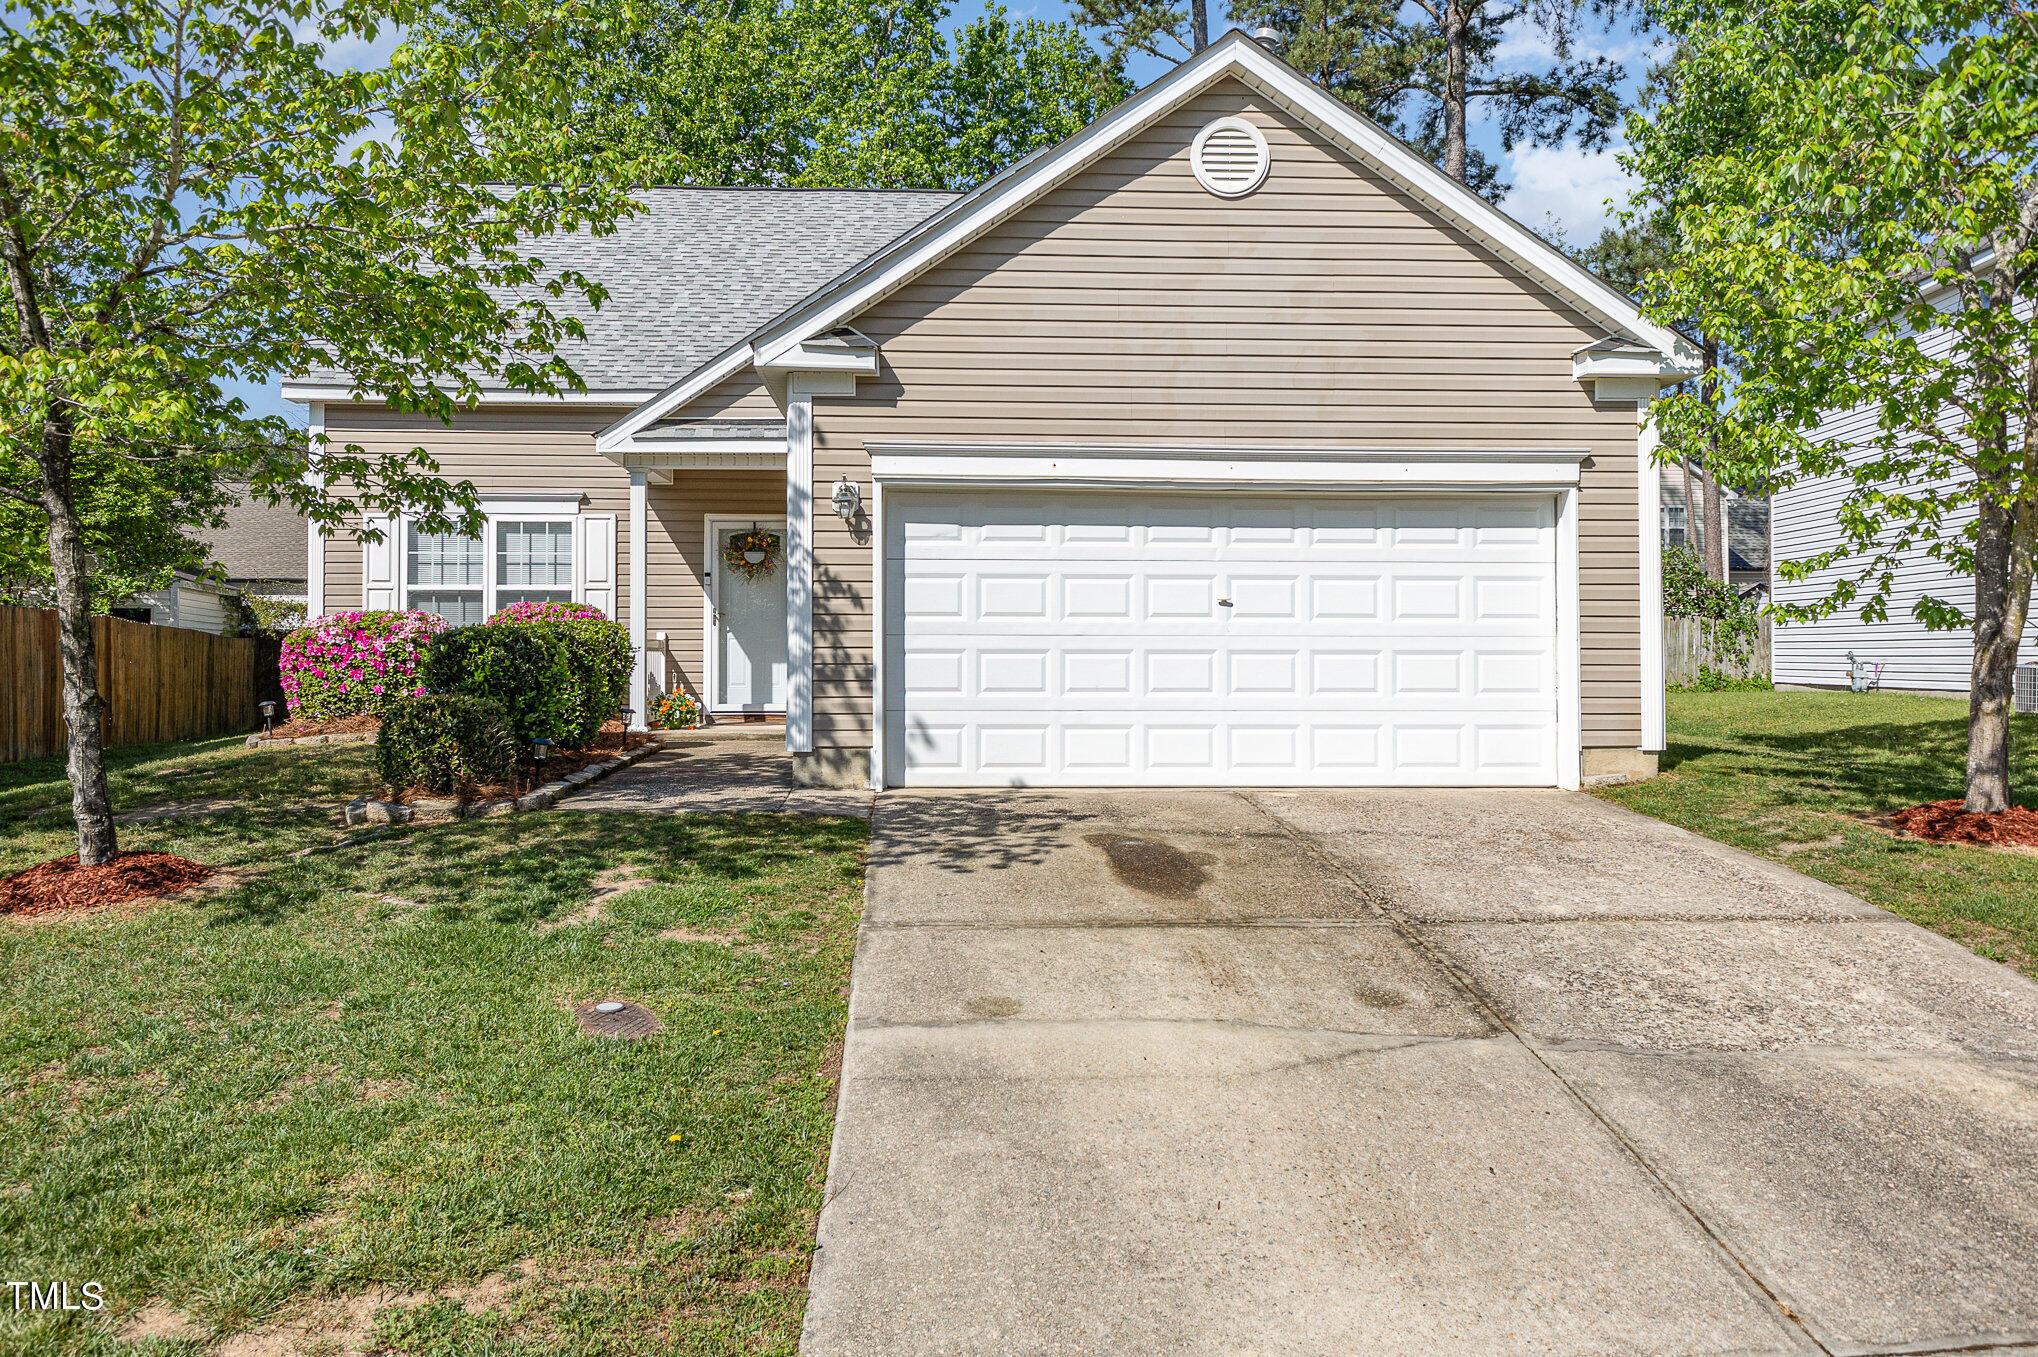 Photo one of 8609 Neuse Stone Dr Raleigh NC 27616 | MLS 10025672